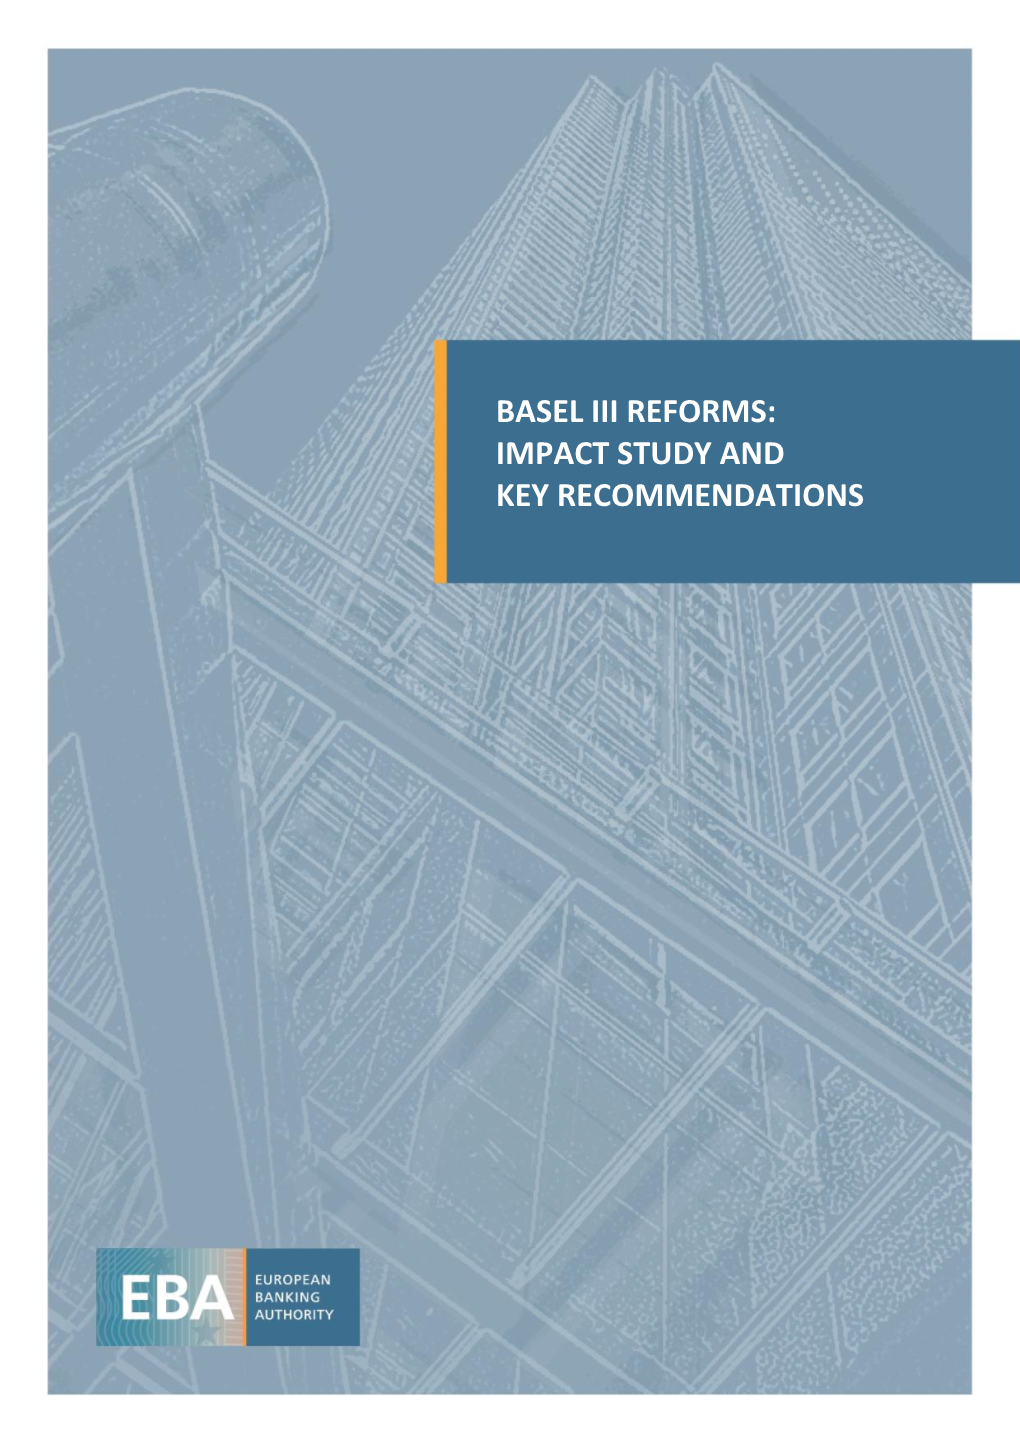 Basel Iii Reforms: Impact Study and Key Recommendations